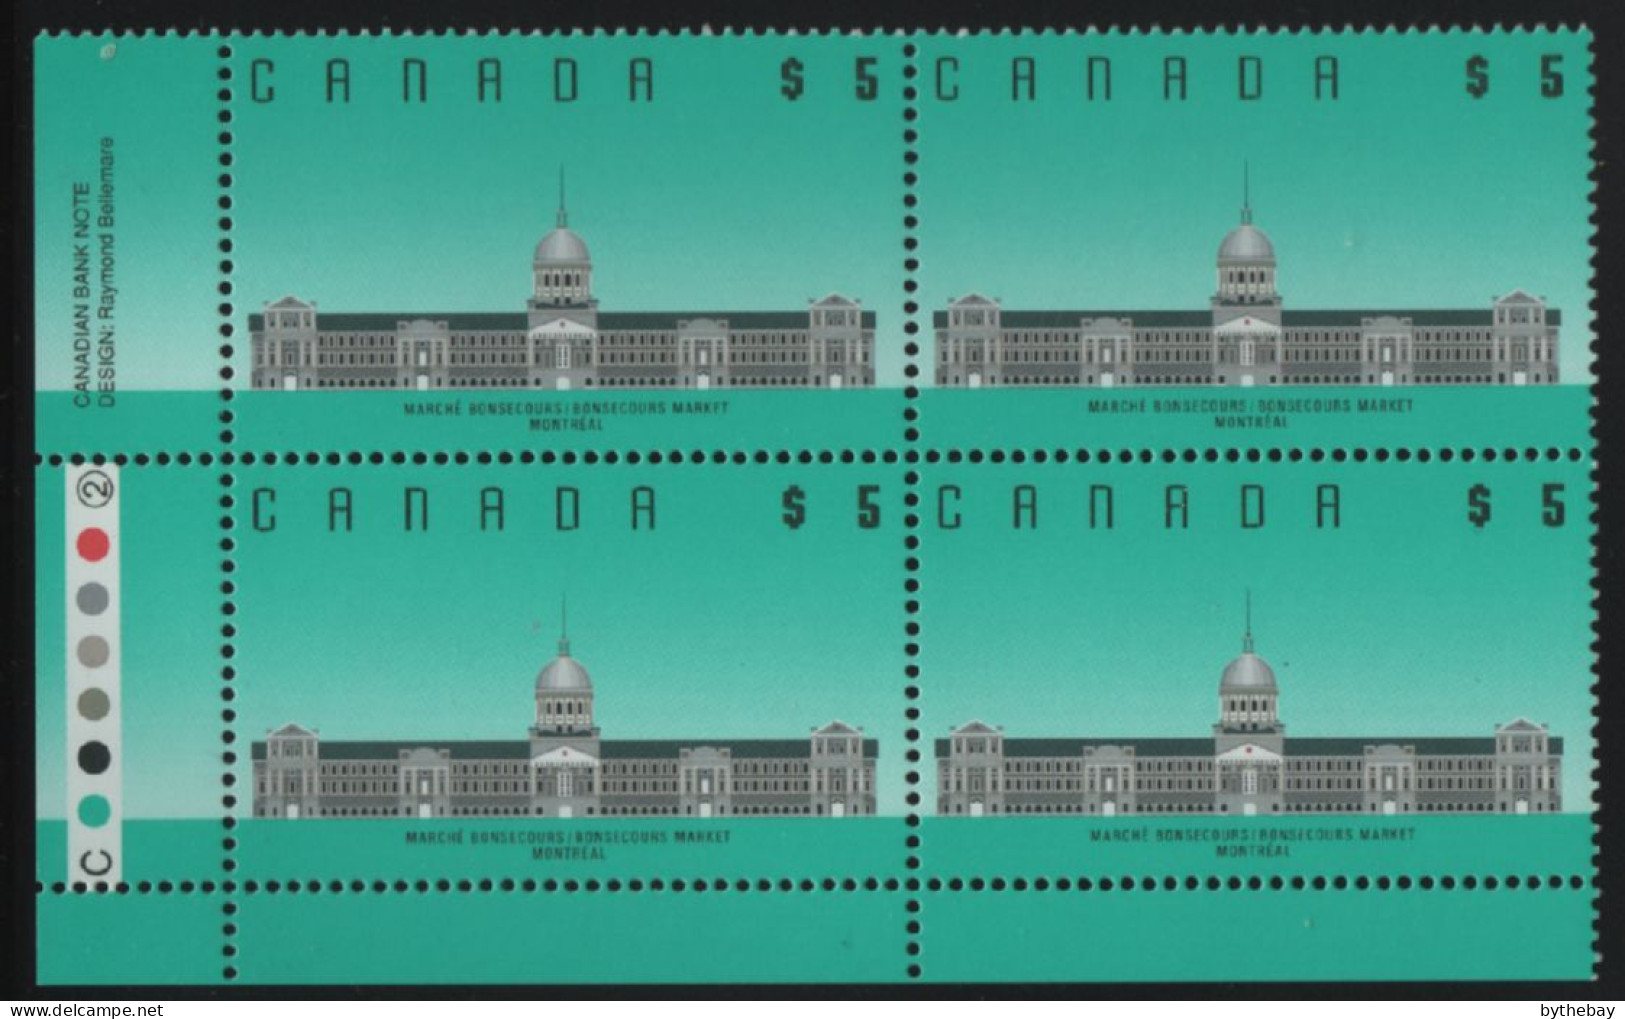 Canada 1988-92 MNH Sc 1183i $5 Bonsecours Market LL Plate Block - Plate Number & Inscriptions